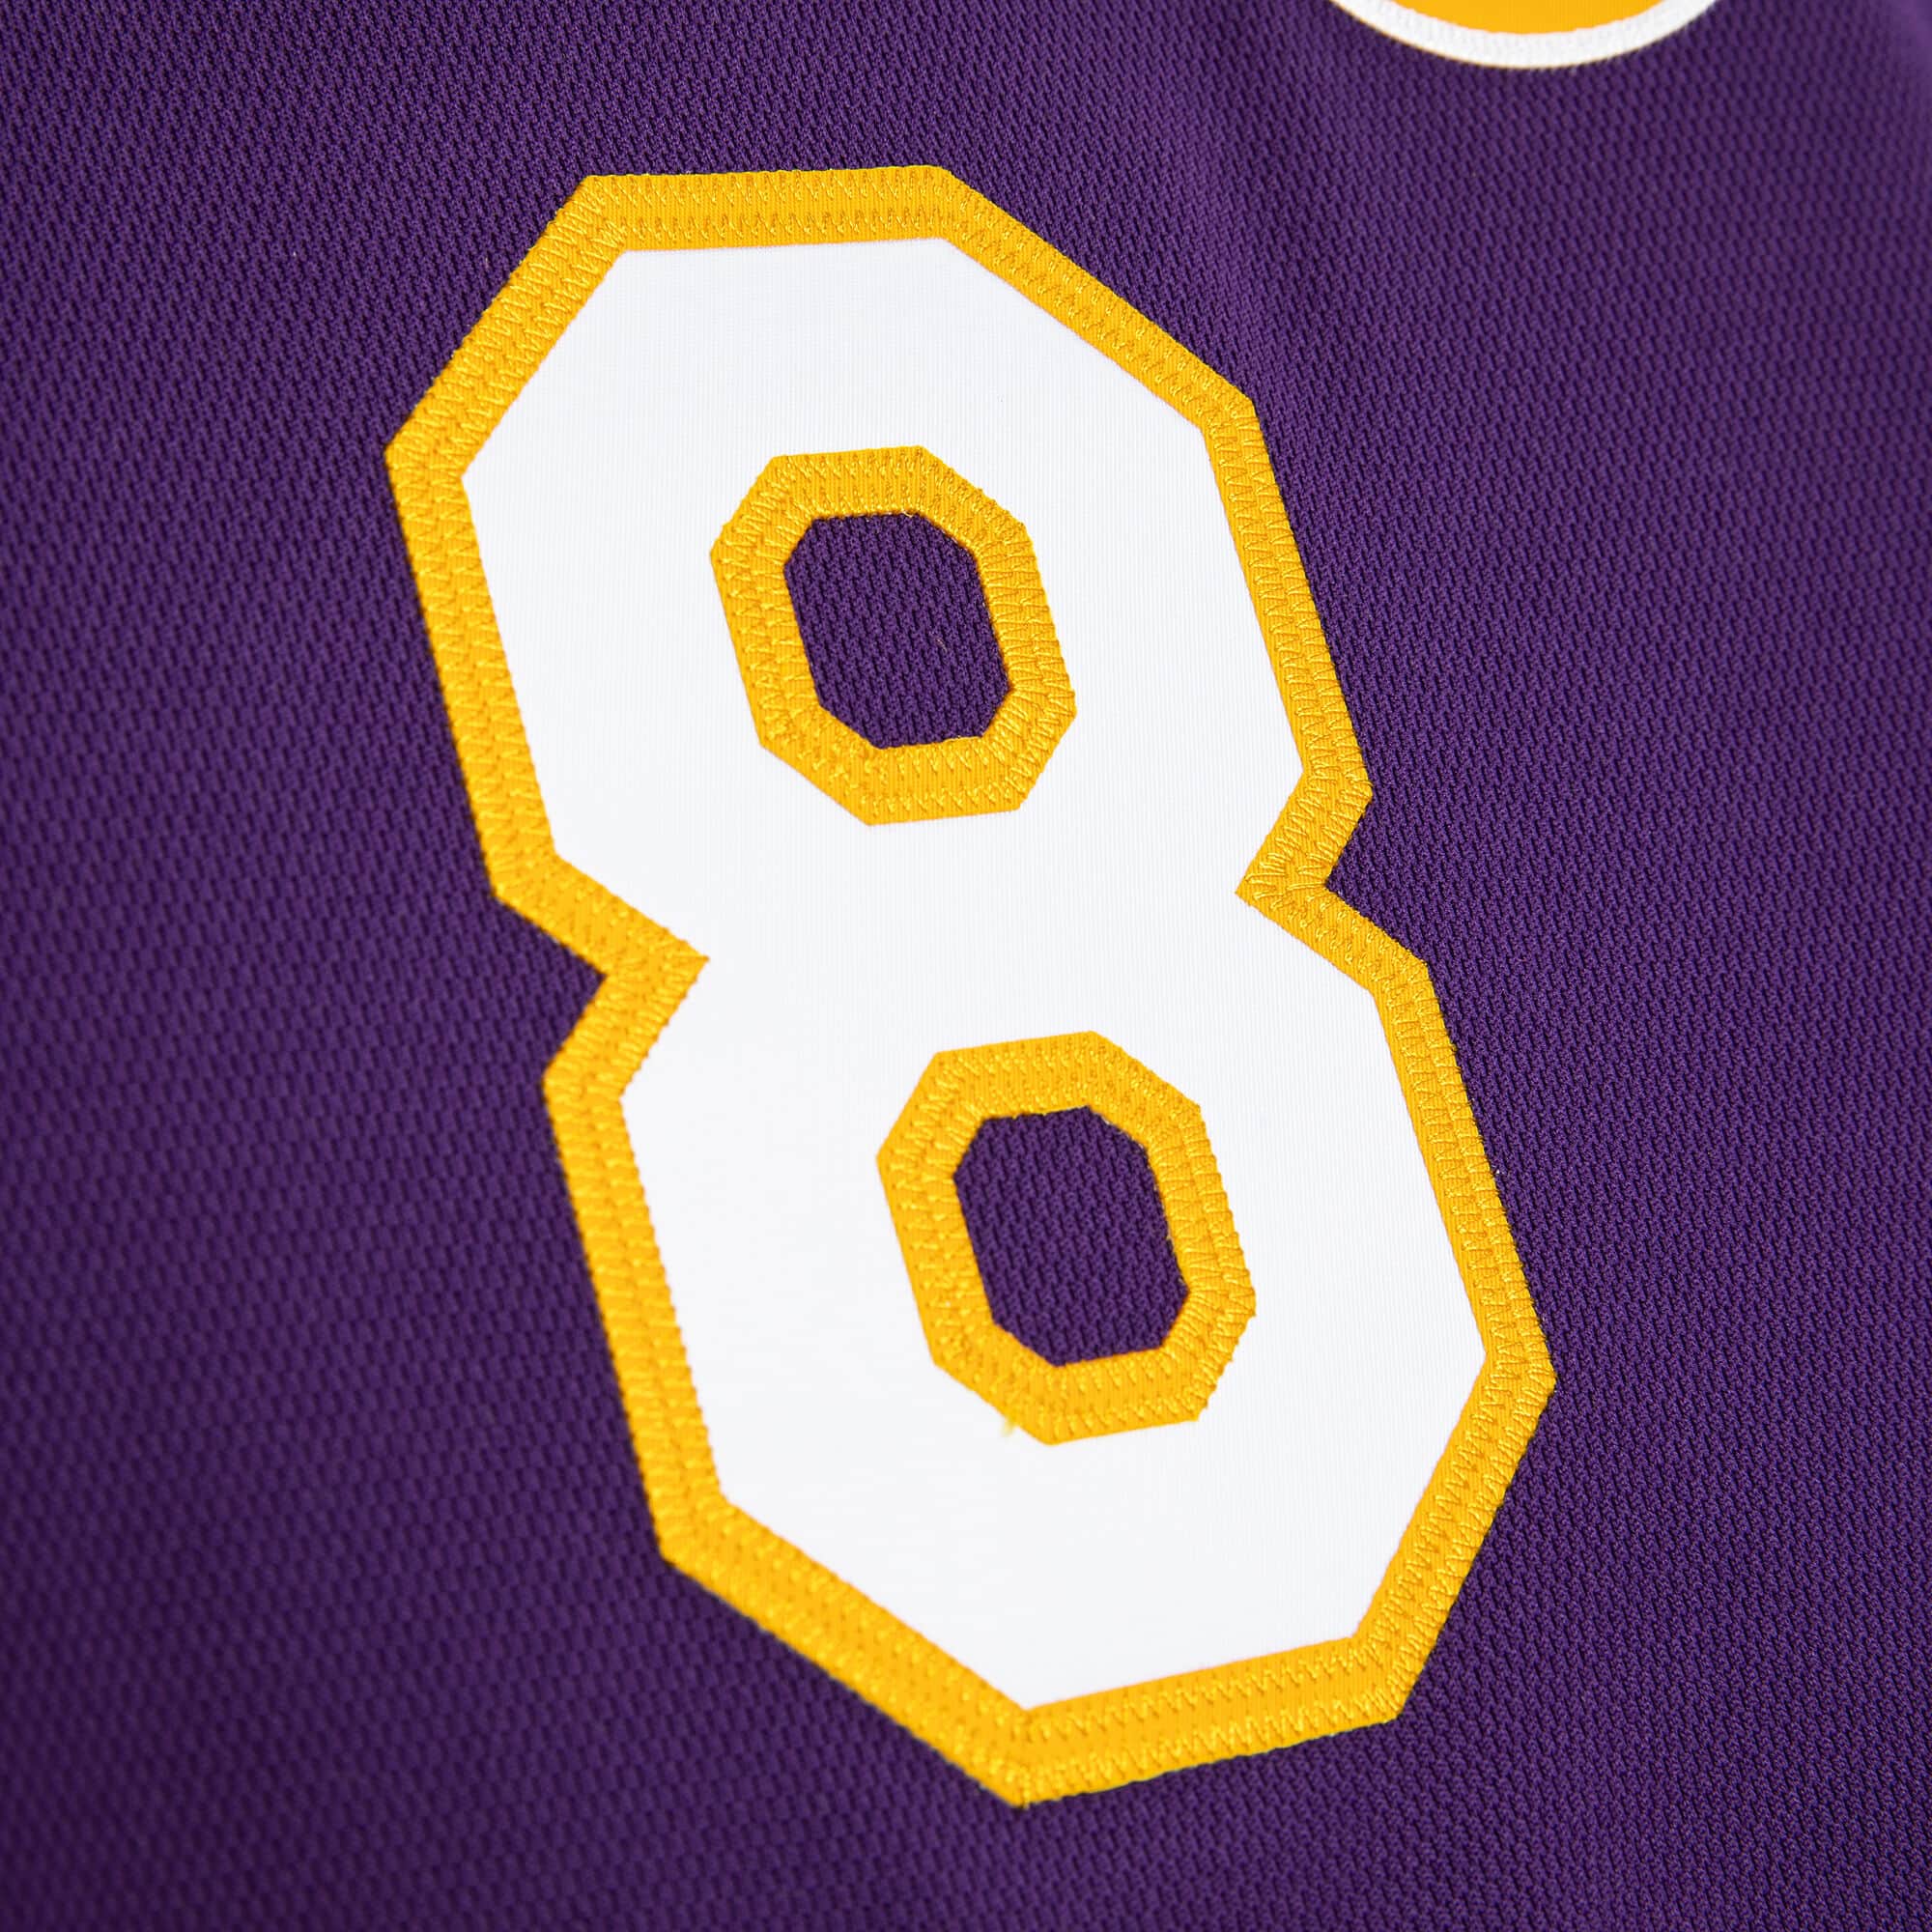 Mitchell & Ness NBA Authentic Jersey 'Los Angeles Lakers - Kobe Bryant 1999-00' AJY4CP19001-LALLTGD99KBR US XL